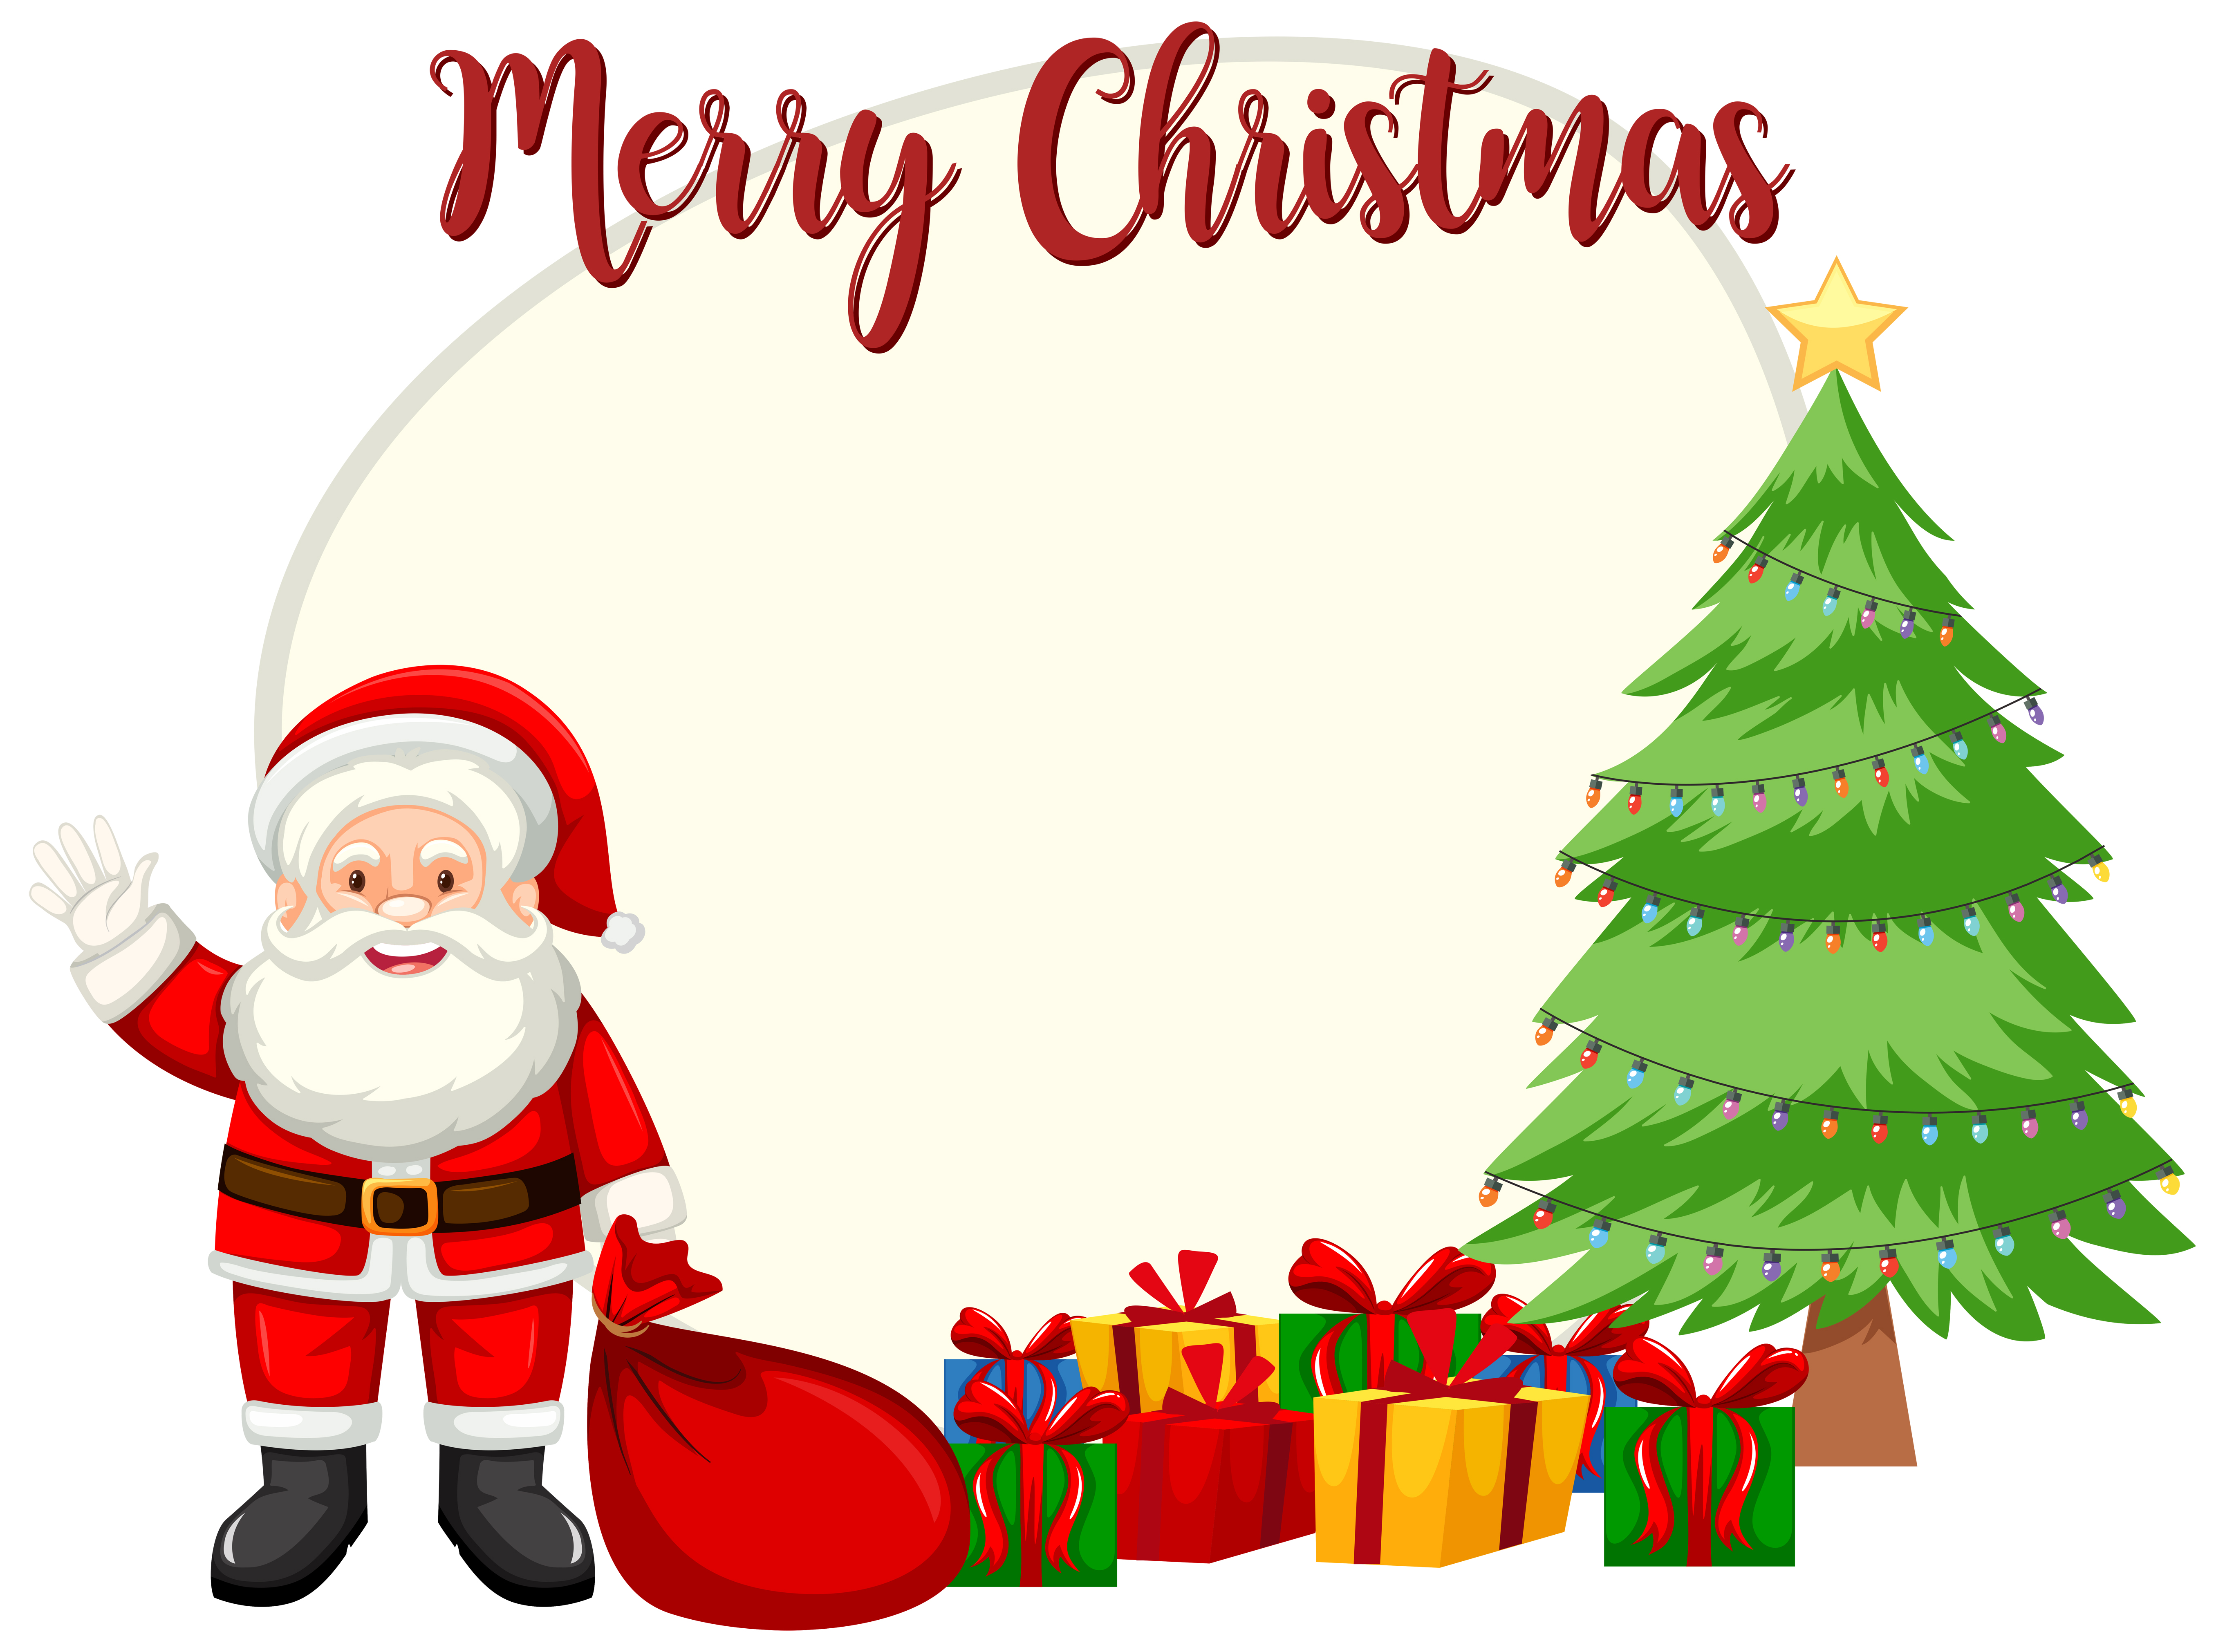 Merry Christmas Card Template Download Free Vectors Clipart Graphics Vector Art